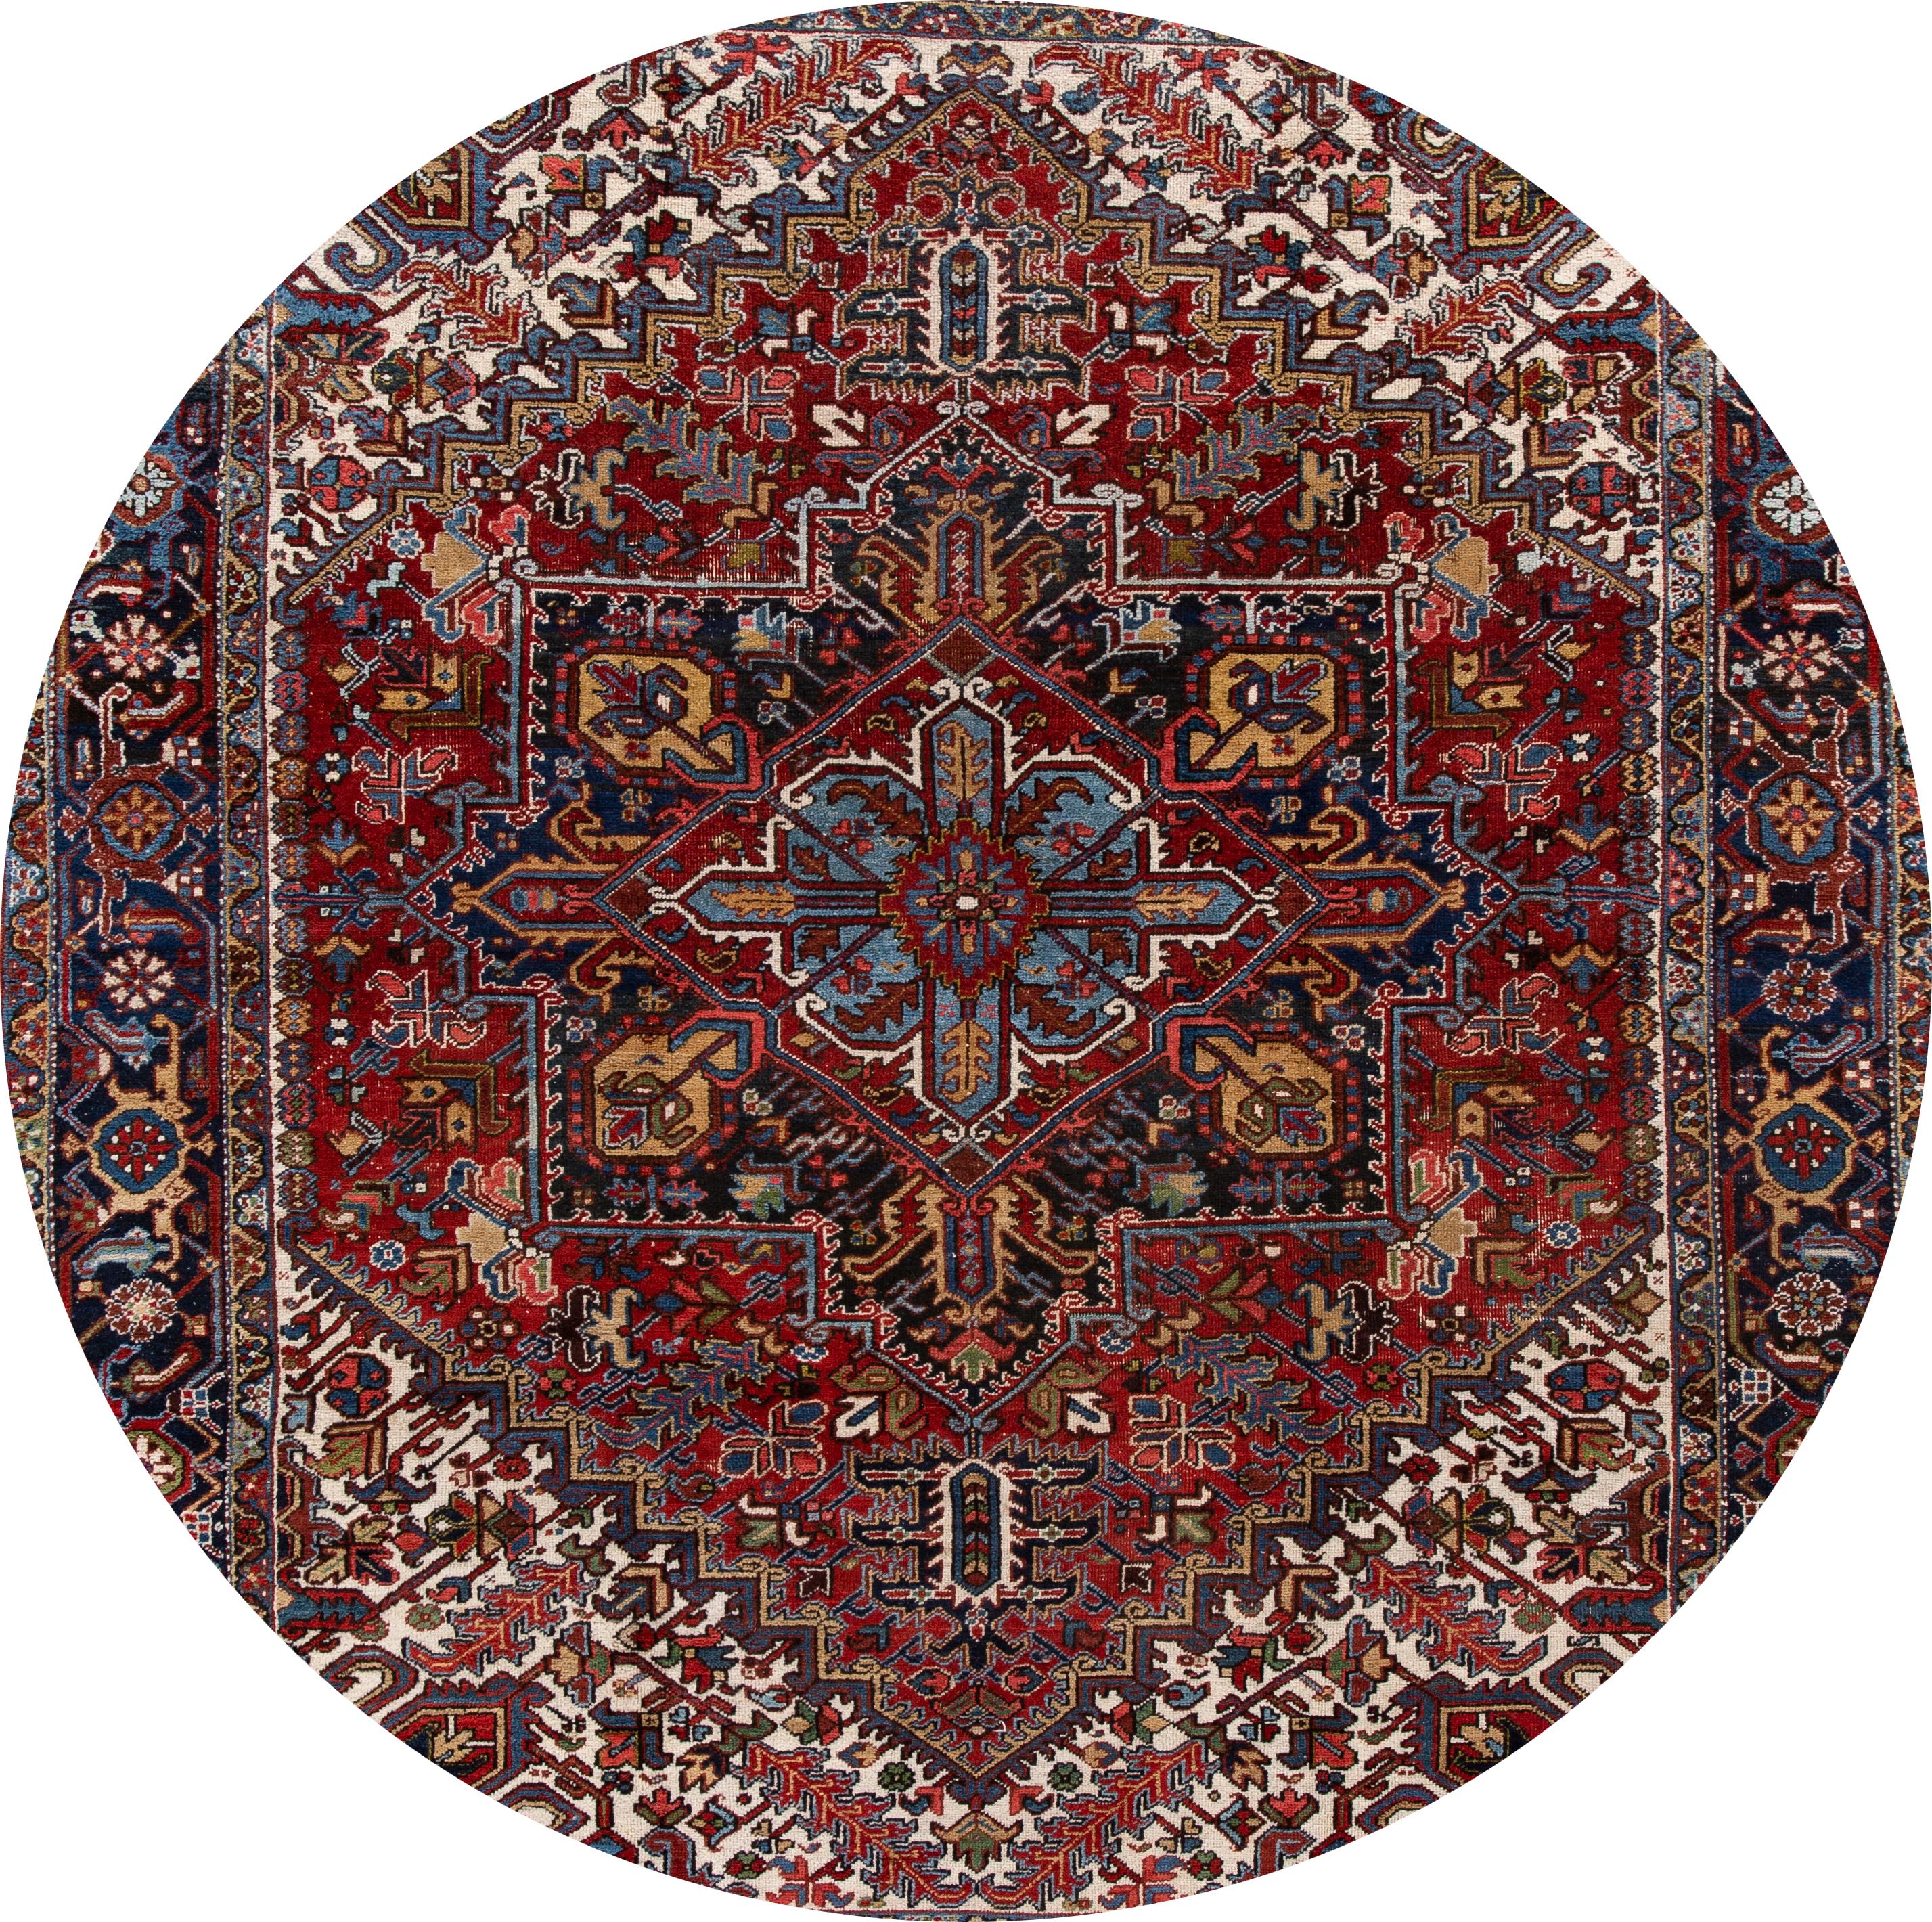 Beautiful antique Heriz rug, hand knotted wool with a navy field, red and tan accents in an all-over Classic motif.
This rug measures 8' 7